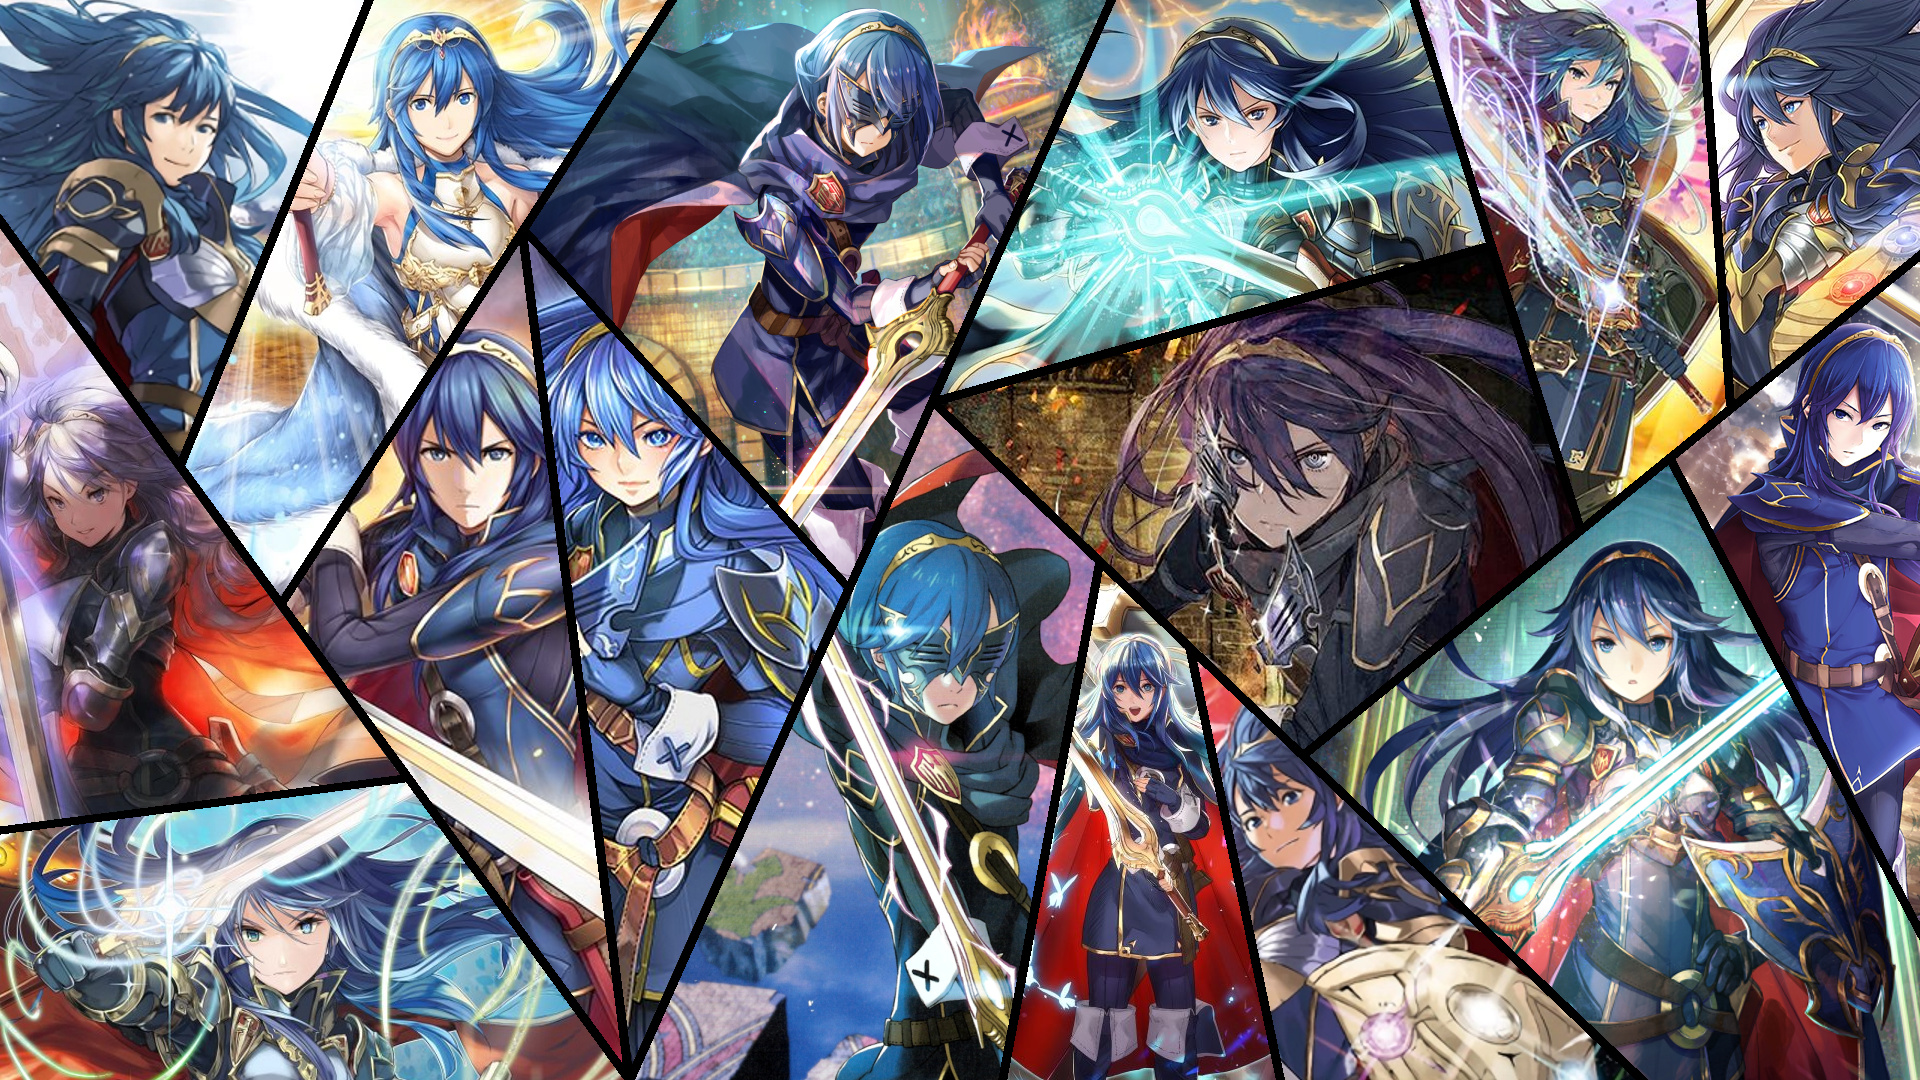 Desktop backgrounds, Fire Emblem lovers, Sharing wallpapers, Passion for the series, 1920x1080 Full HD Desktop